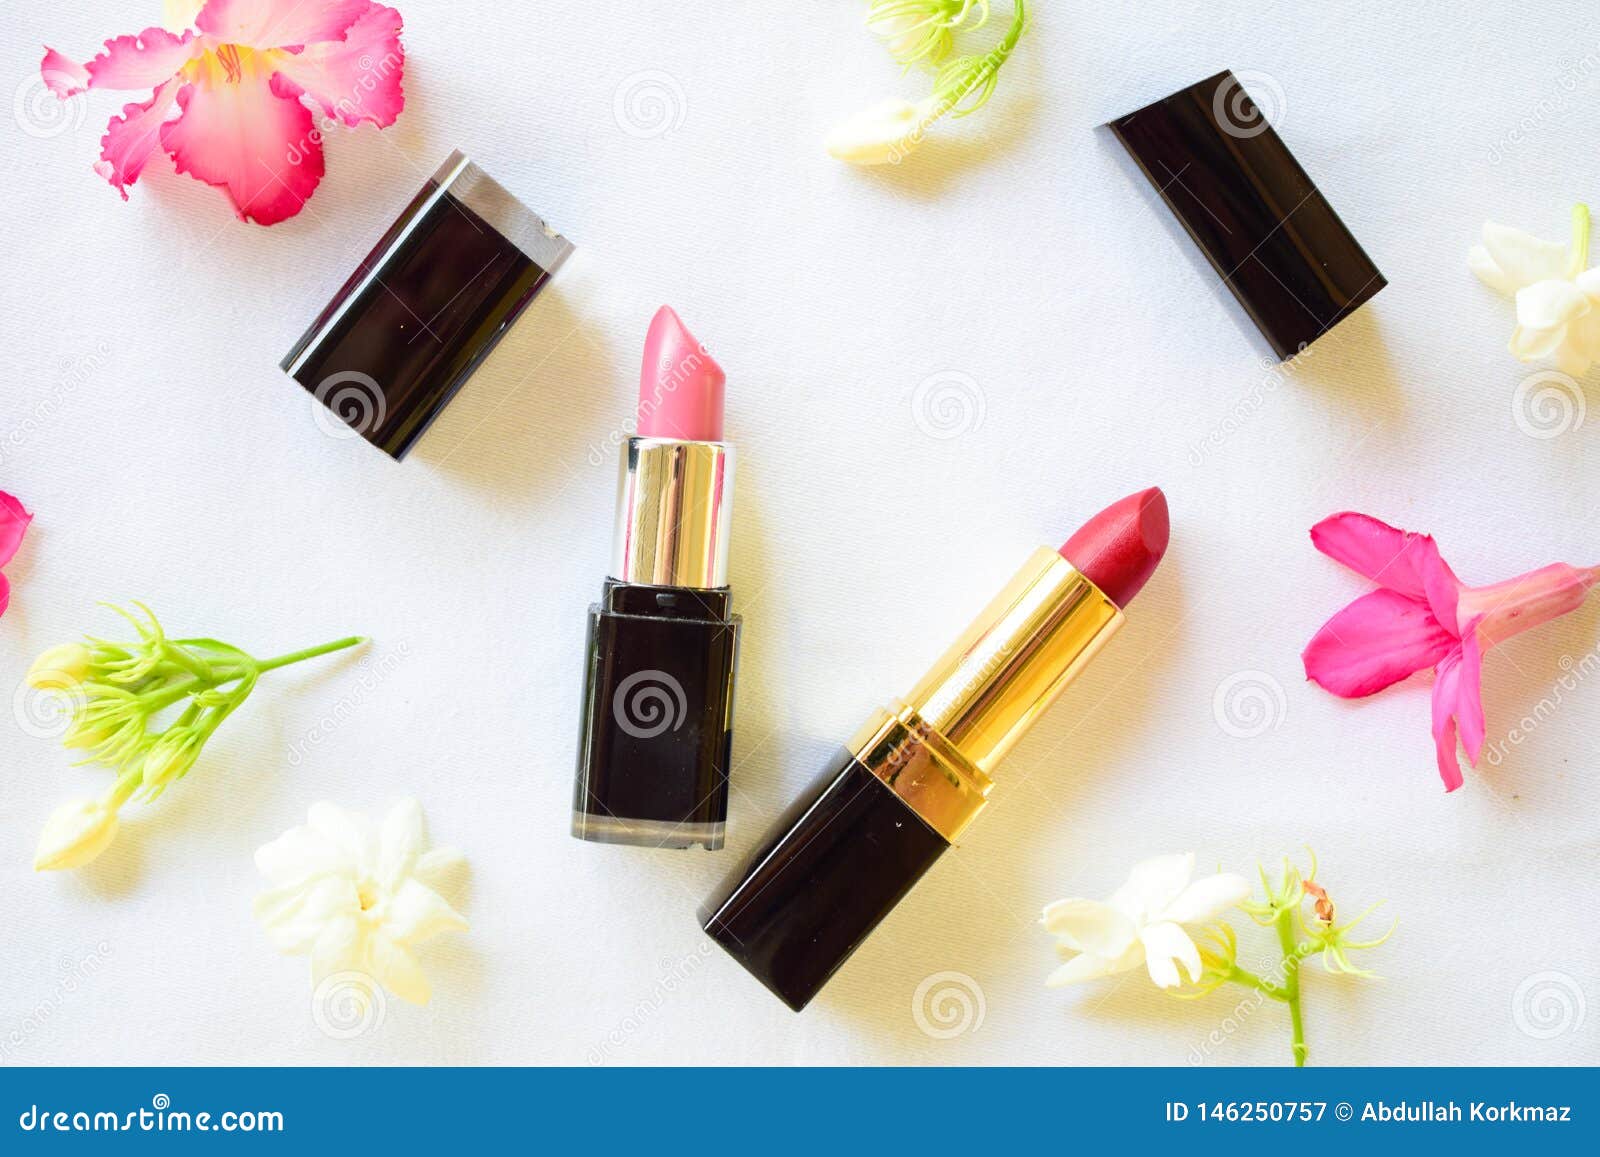 Creative Make Up Composition Stock Image - Image of accessories